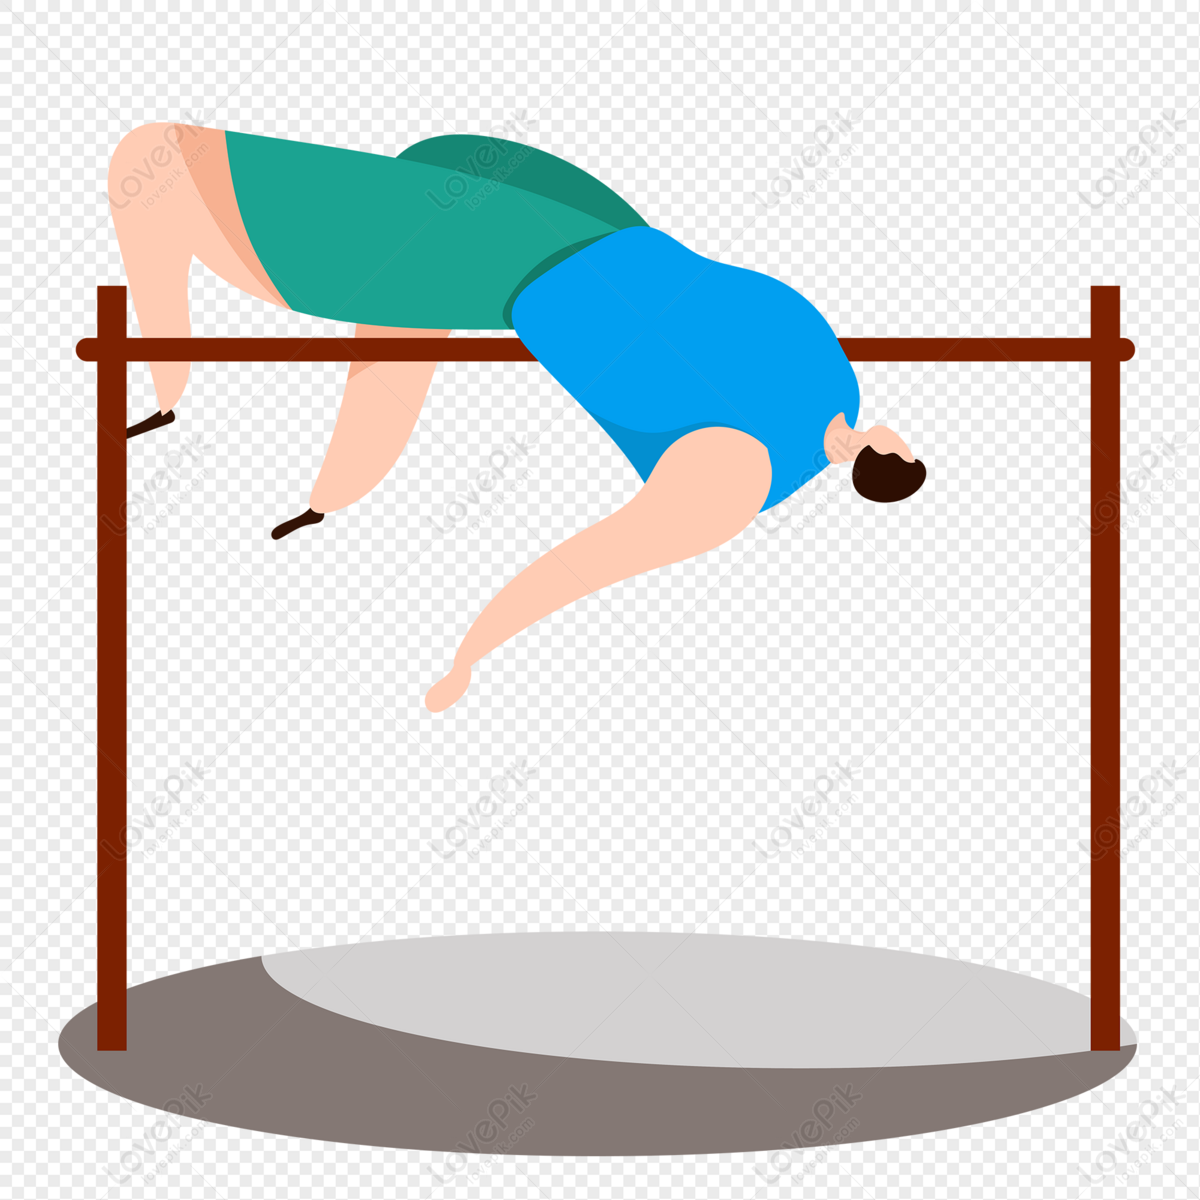 High Jump PNG Picture And Clipart Image For Free Download - Lovepik |  401483615